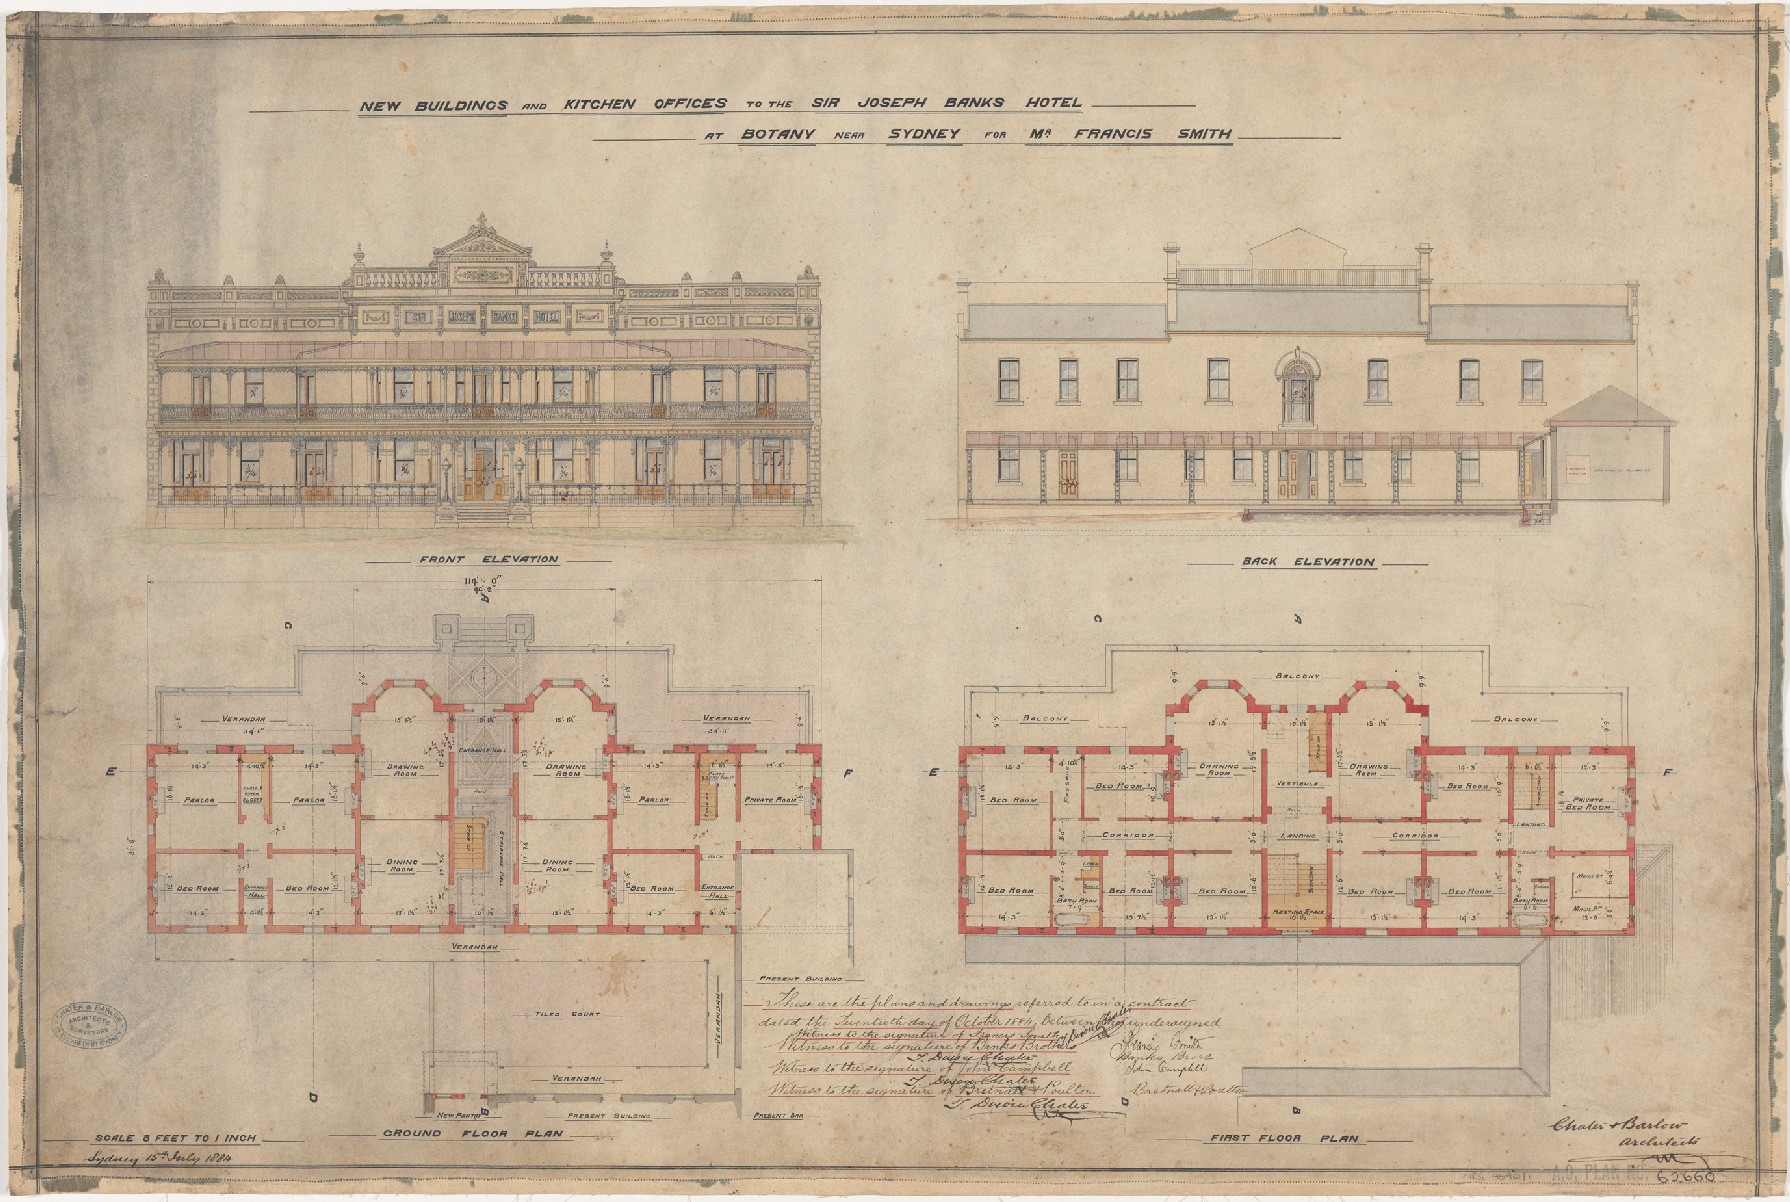 Hotel Plans - State Archives NSW - Digital Gallery